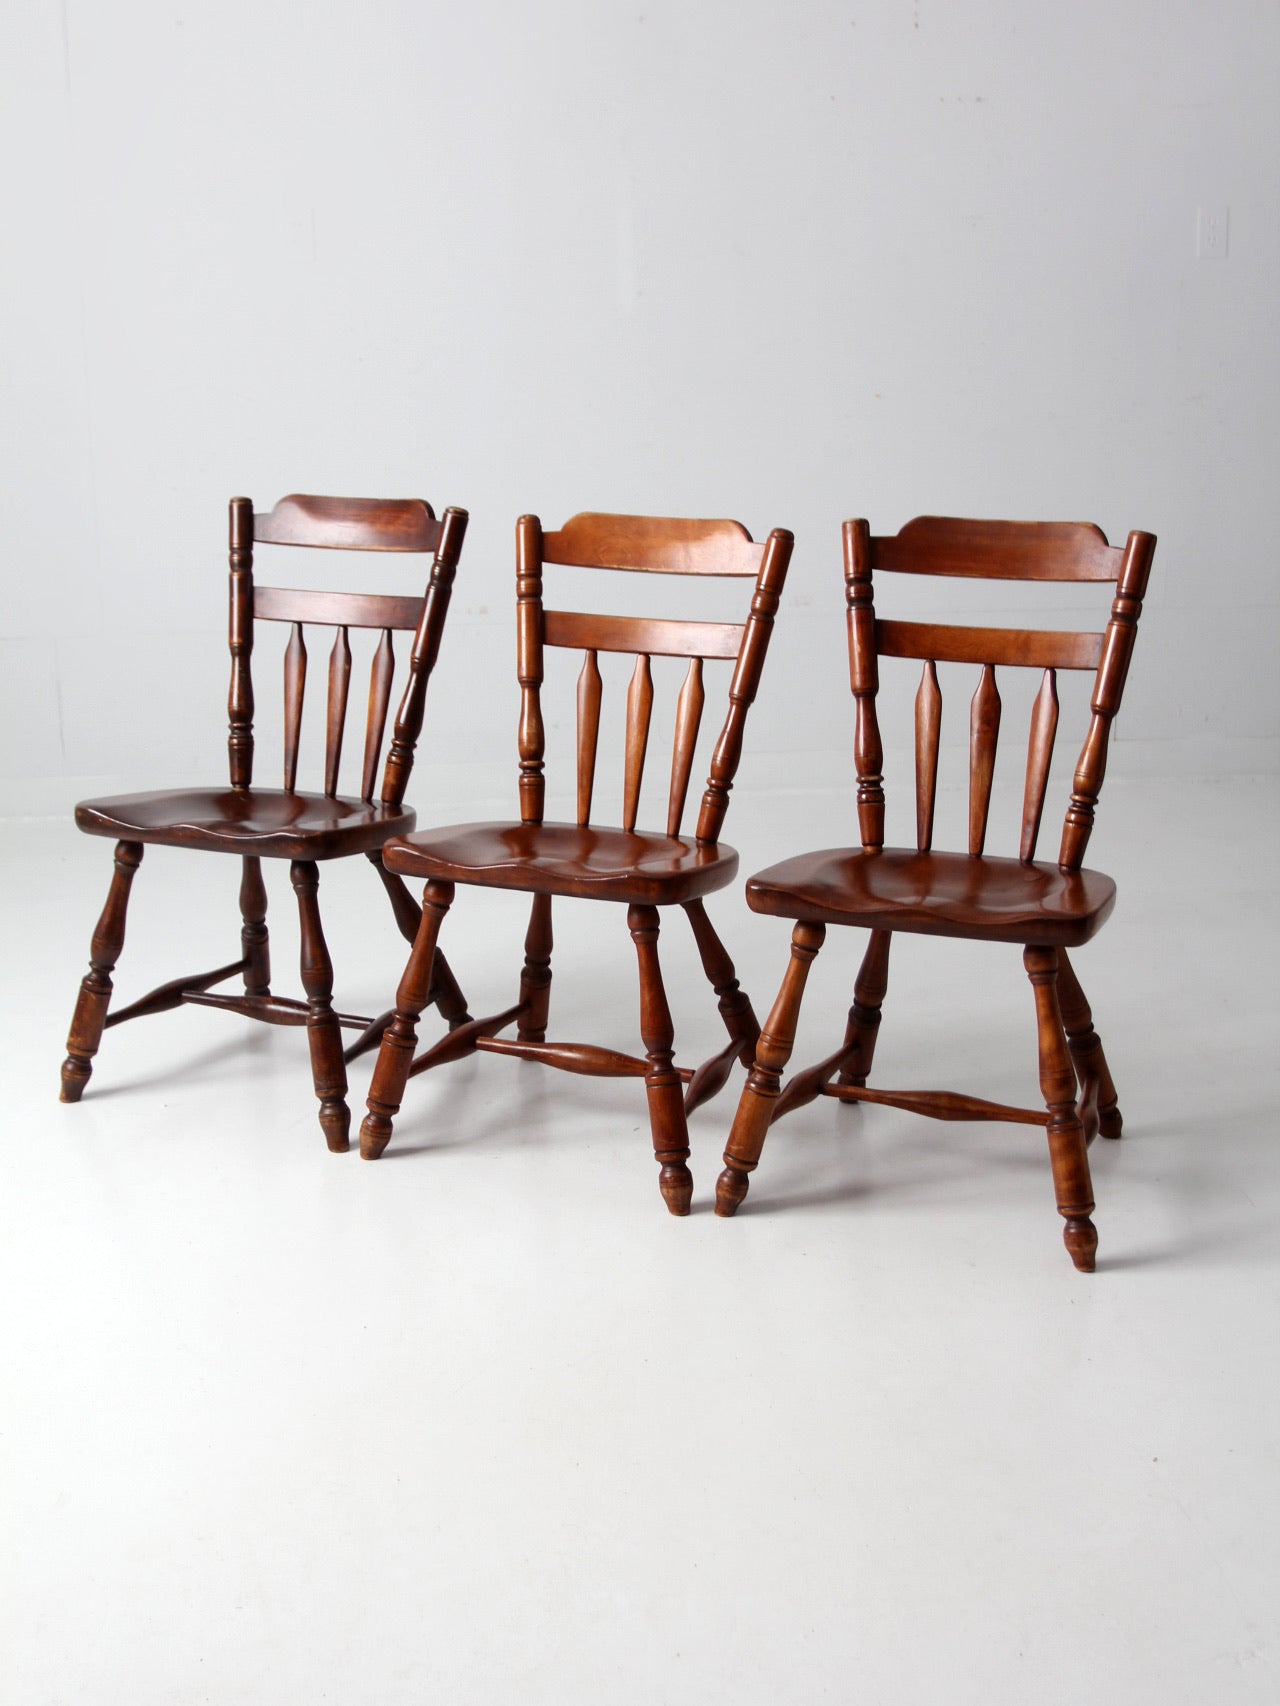 mid century Cushman Colonial dining chairs set 3